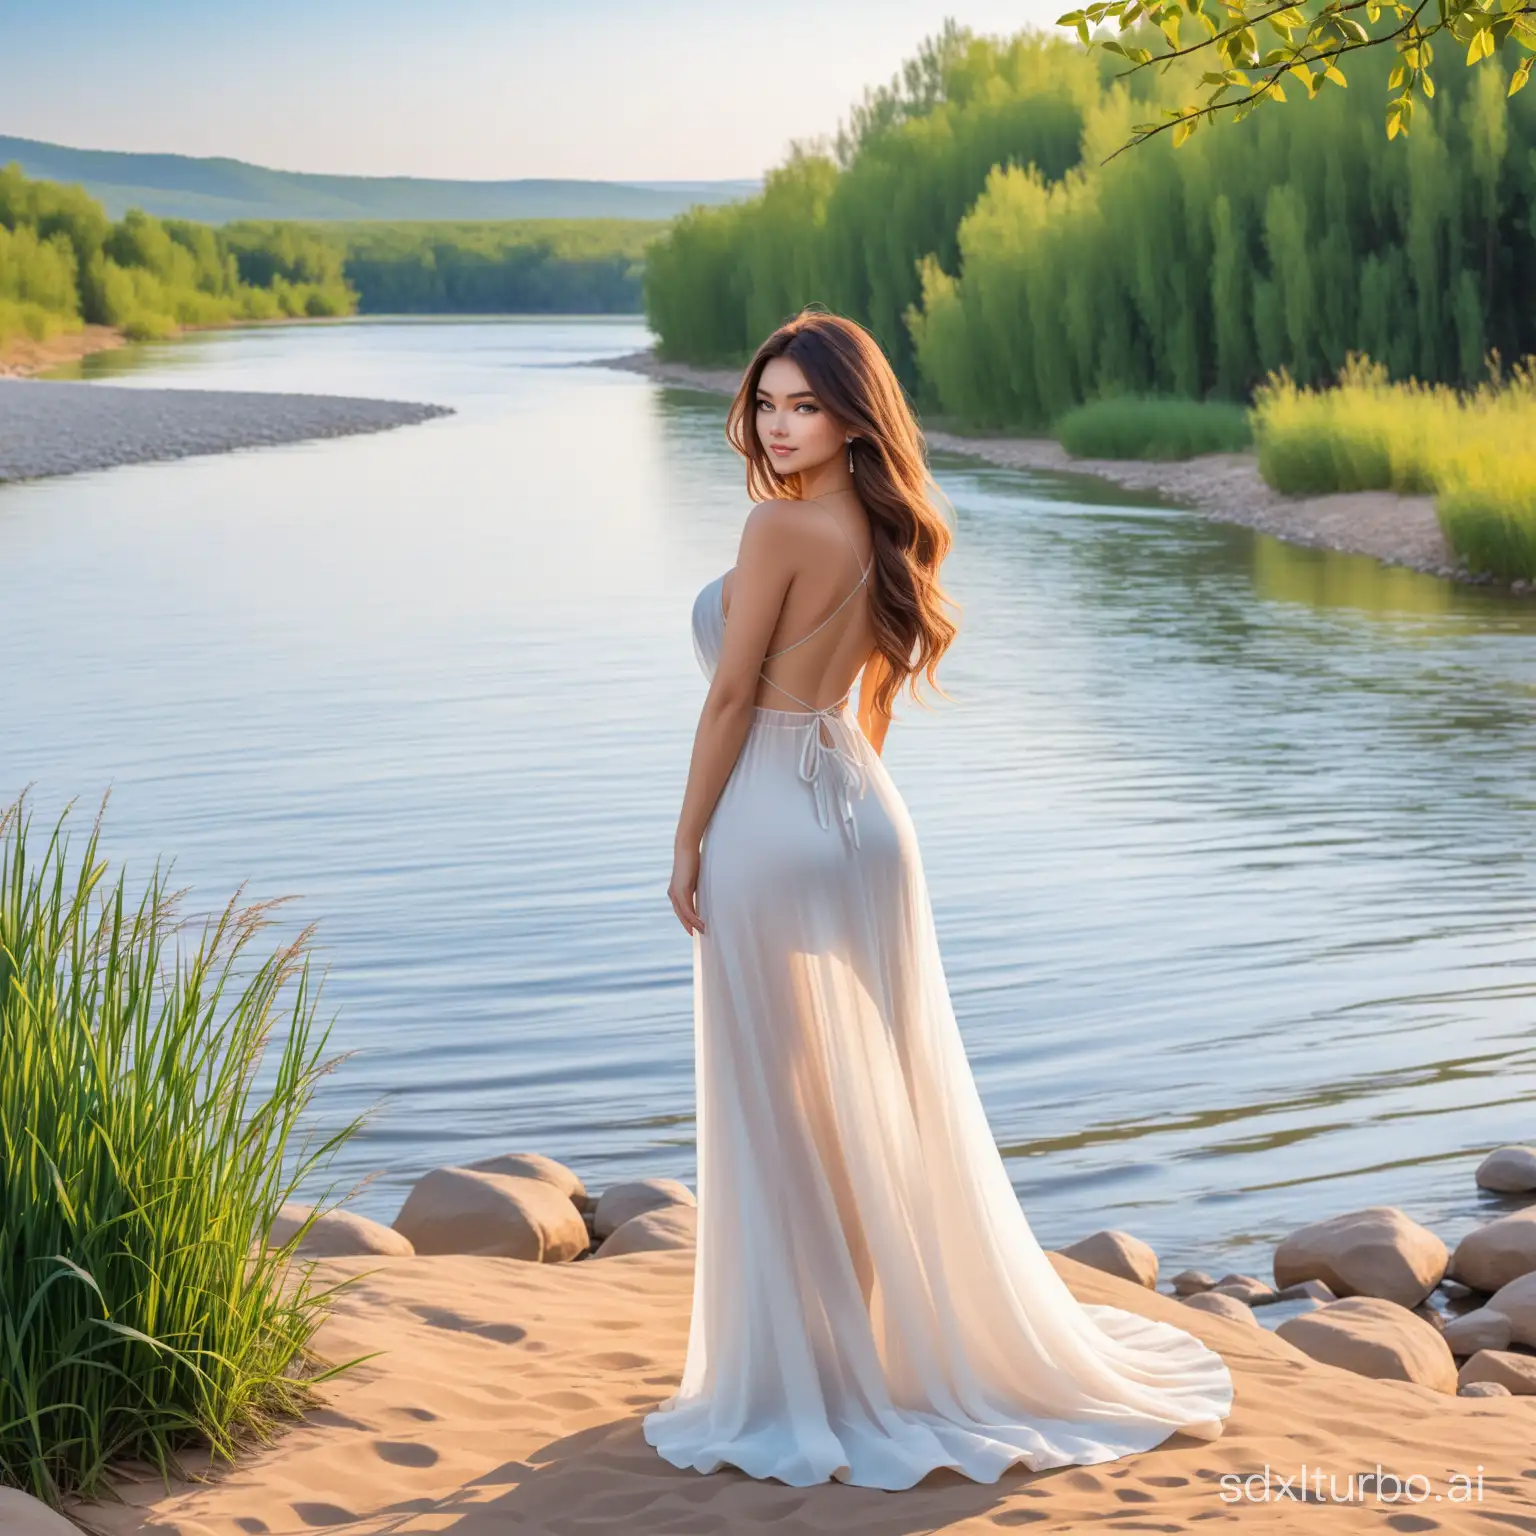 The background of the beautiful woman by the river